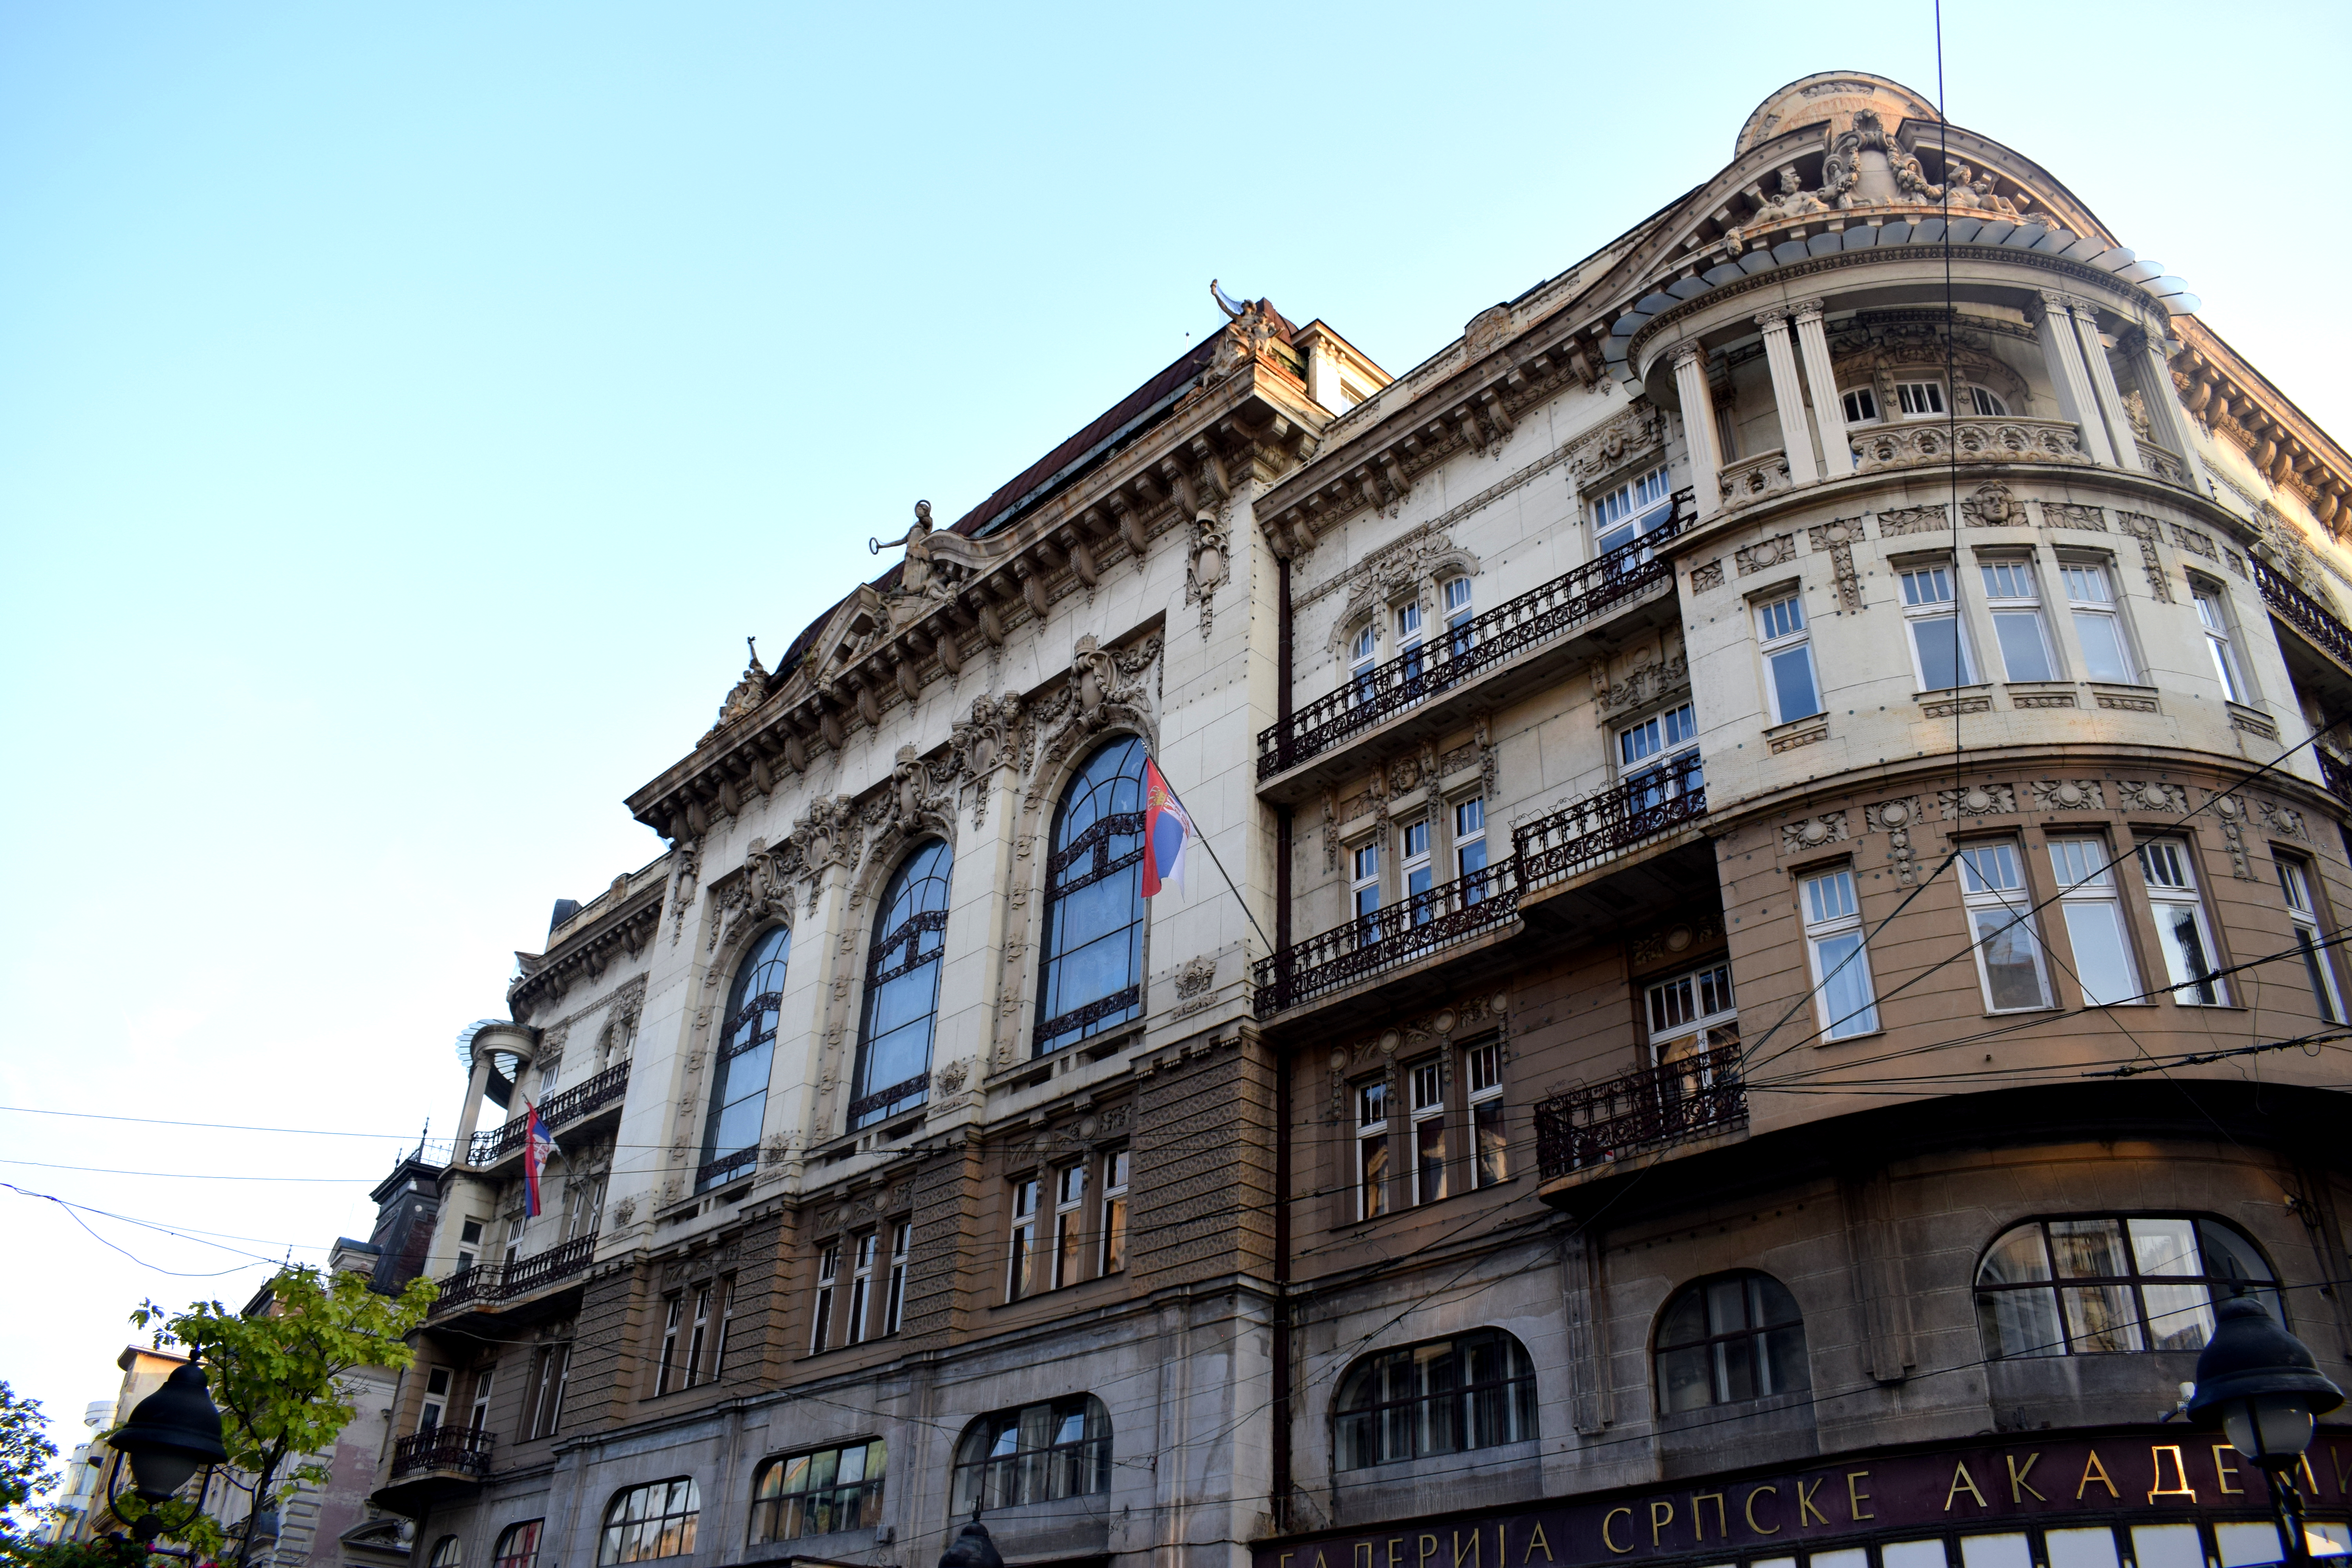 Serbian Academy for Arts and Sciences on Knez Mihailova Street in Belgrade, Serbia